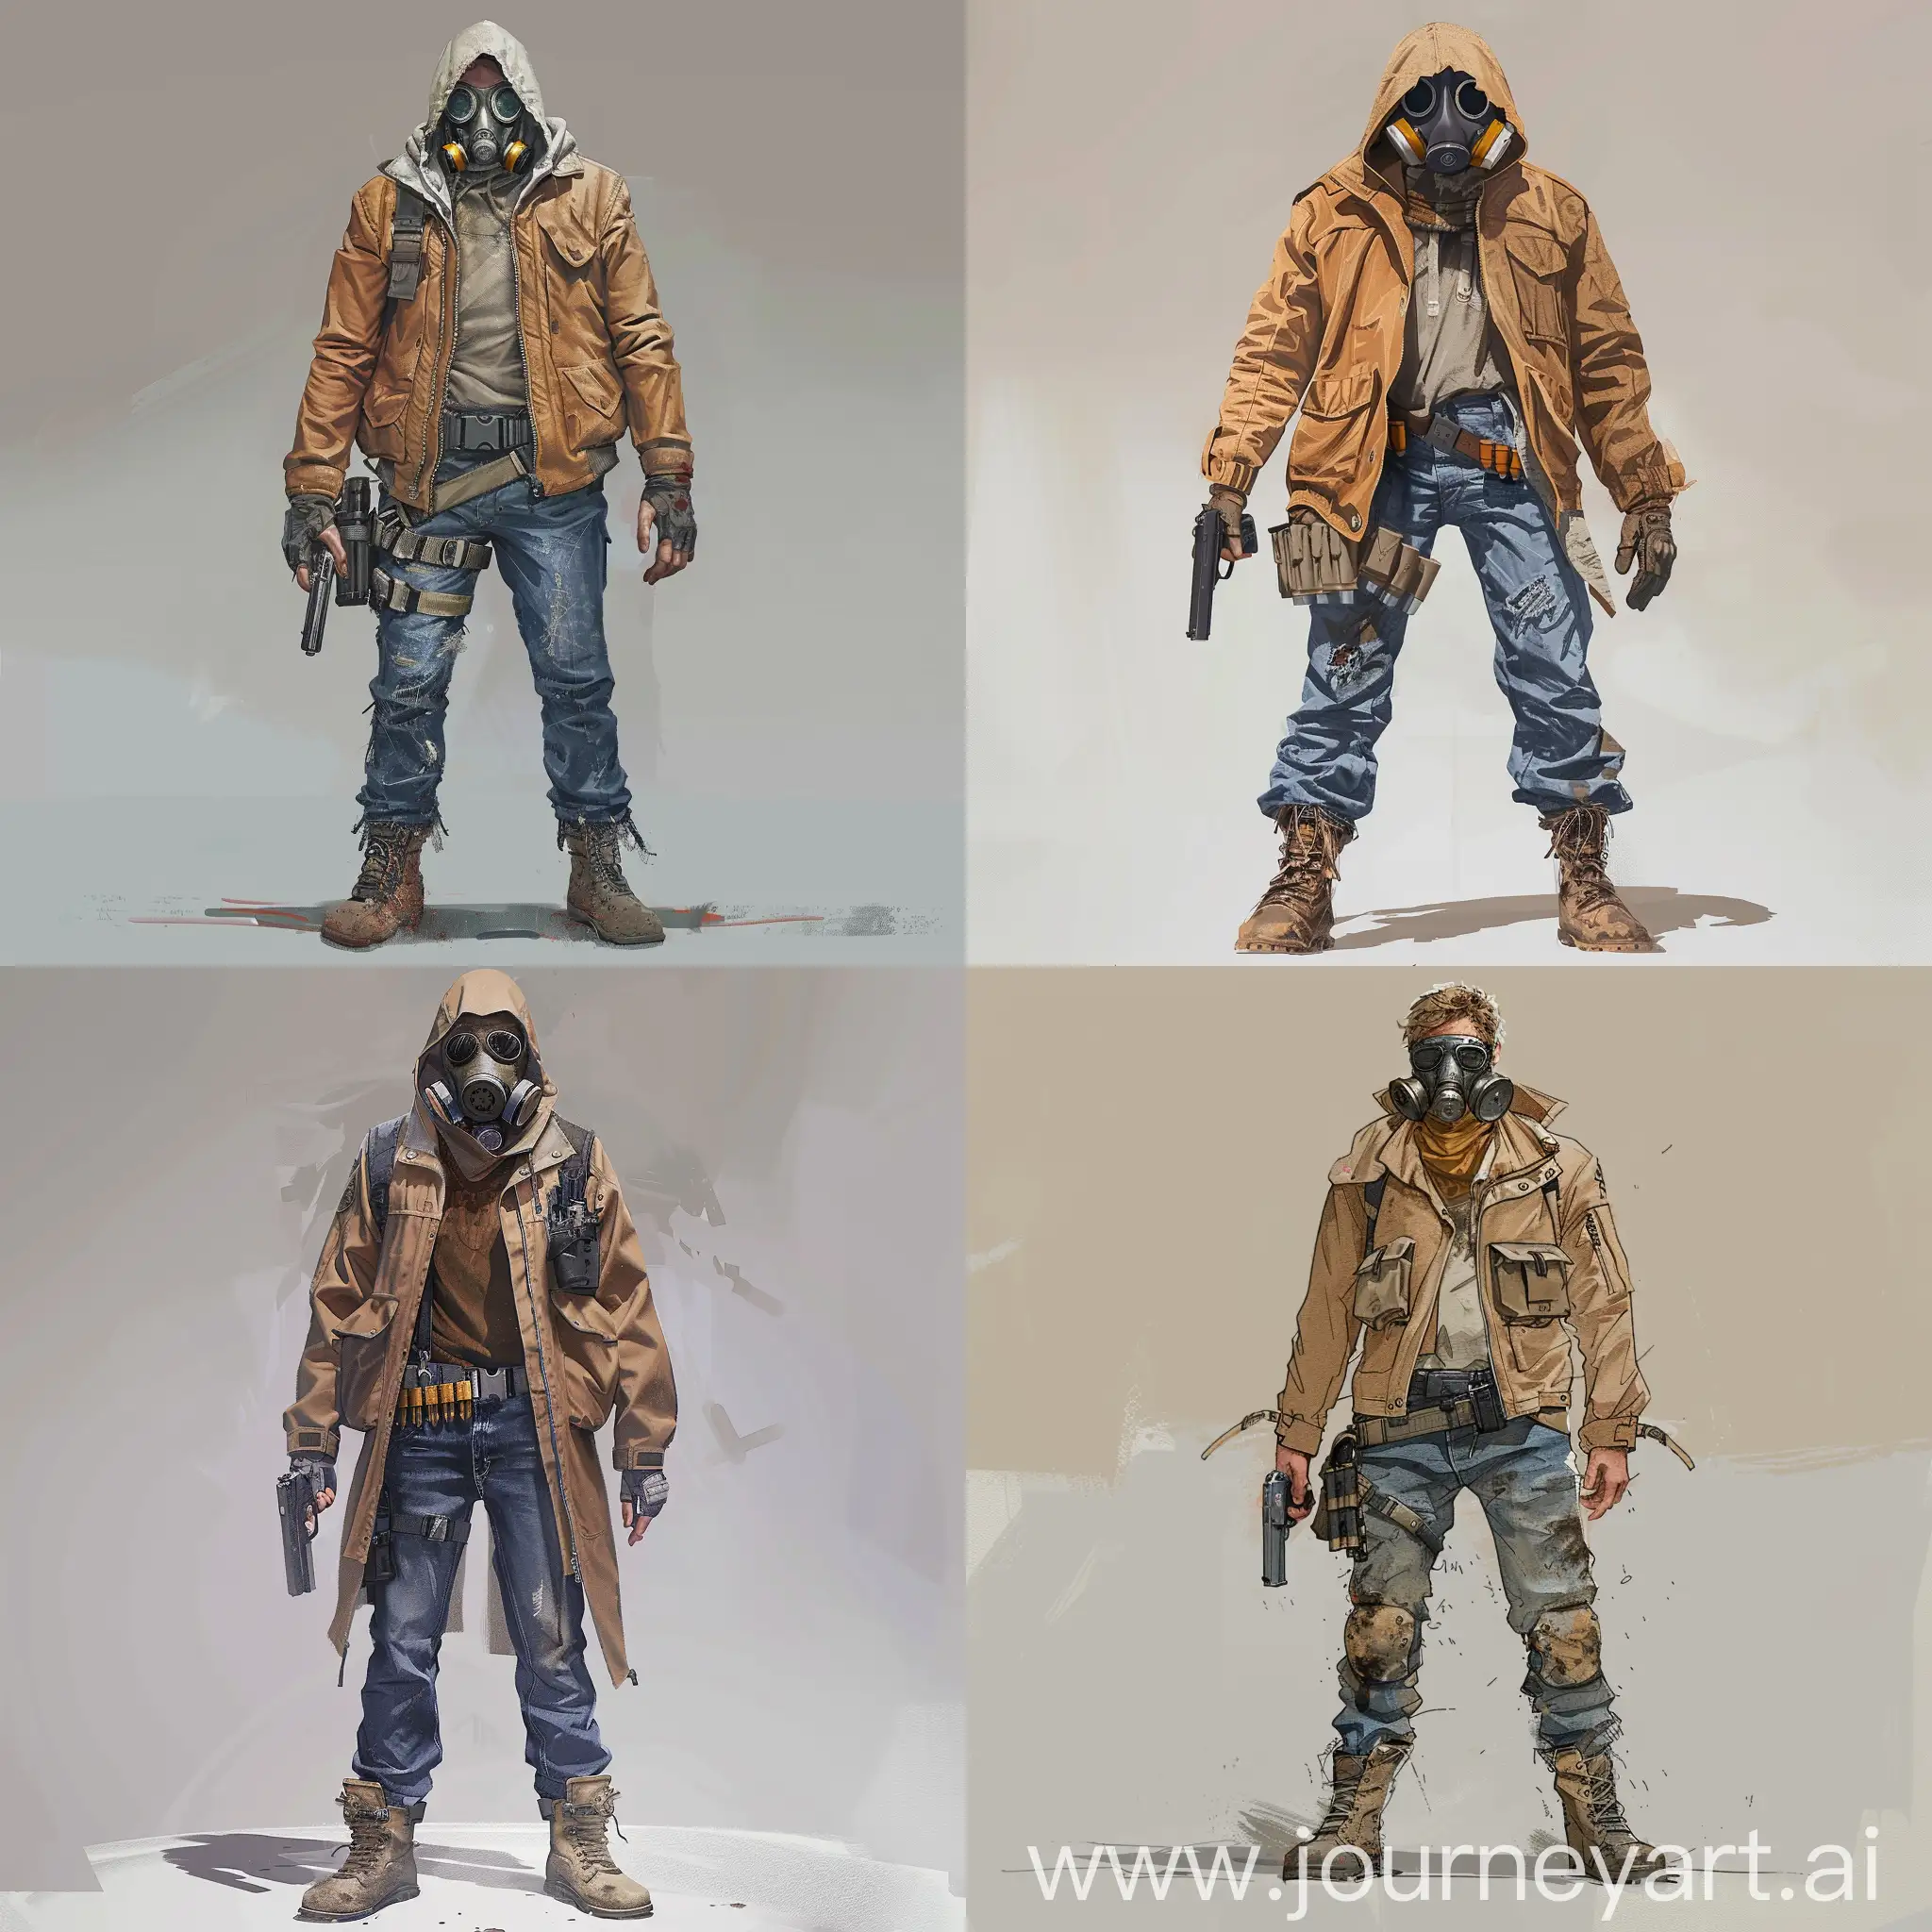 Concept art character, a light brown windbreaker jacket, a gasmask, dirty blue jeans, military boots, a belt with pouches on it, a pistol in his hand.